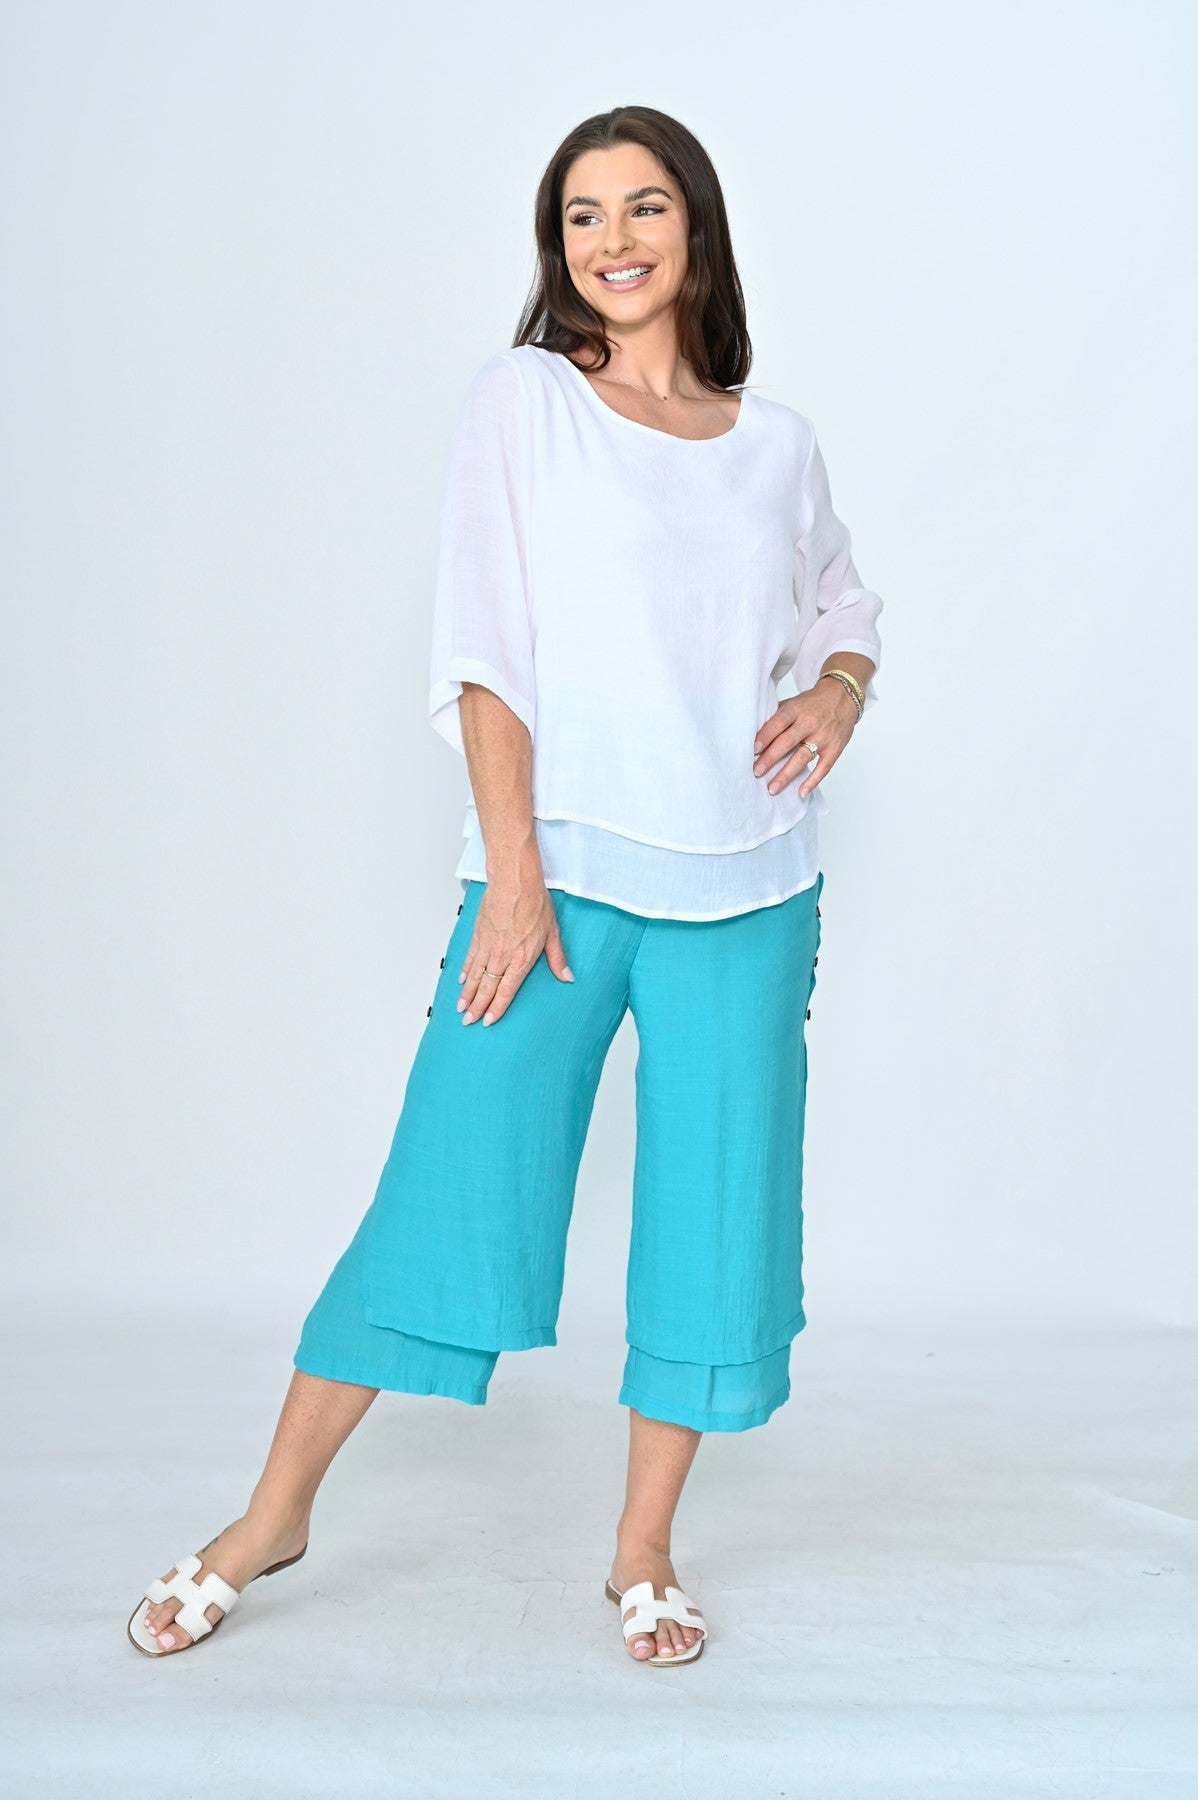 LA MODE_3/4 SIDE BUTTON LAYERED BEACH PANT TEAL _ 3/4 SIDE BUTTON LAYERED BEACH PANT TEAL _ Ebony Boutique NZ